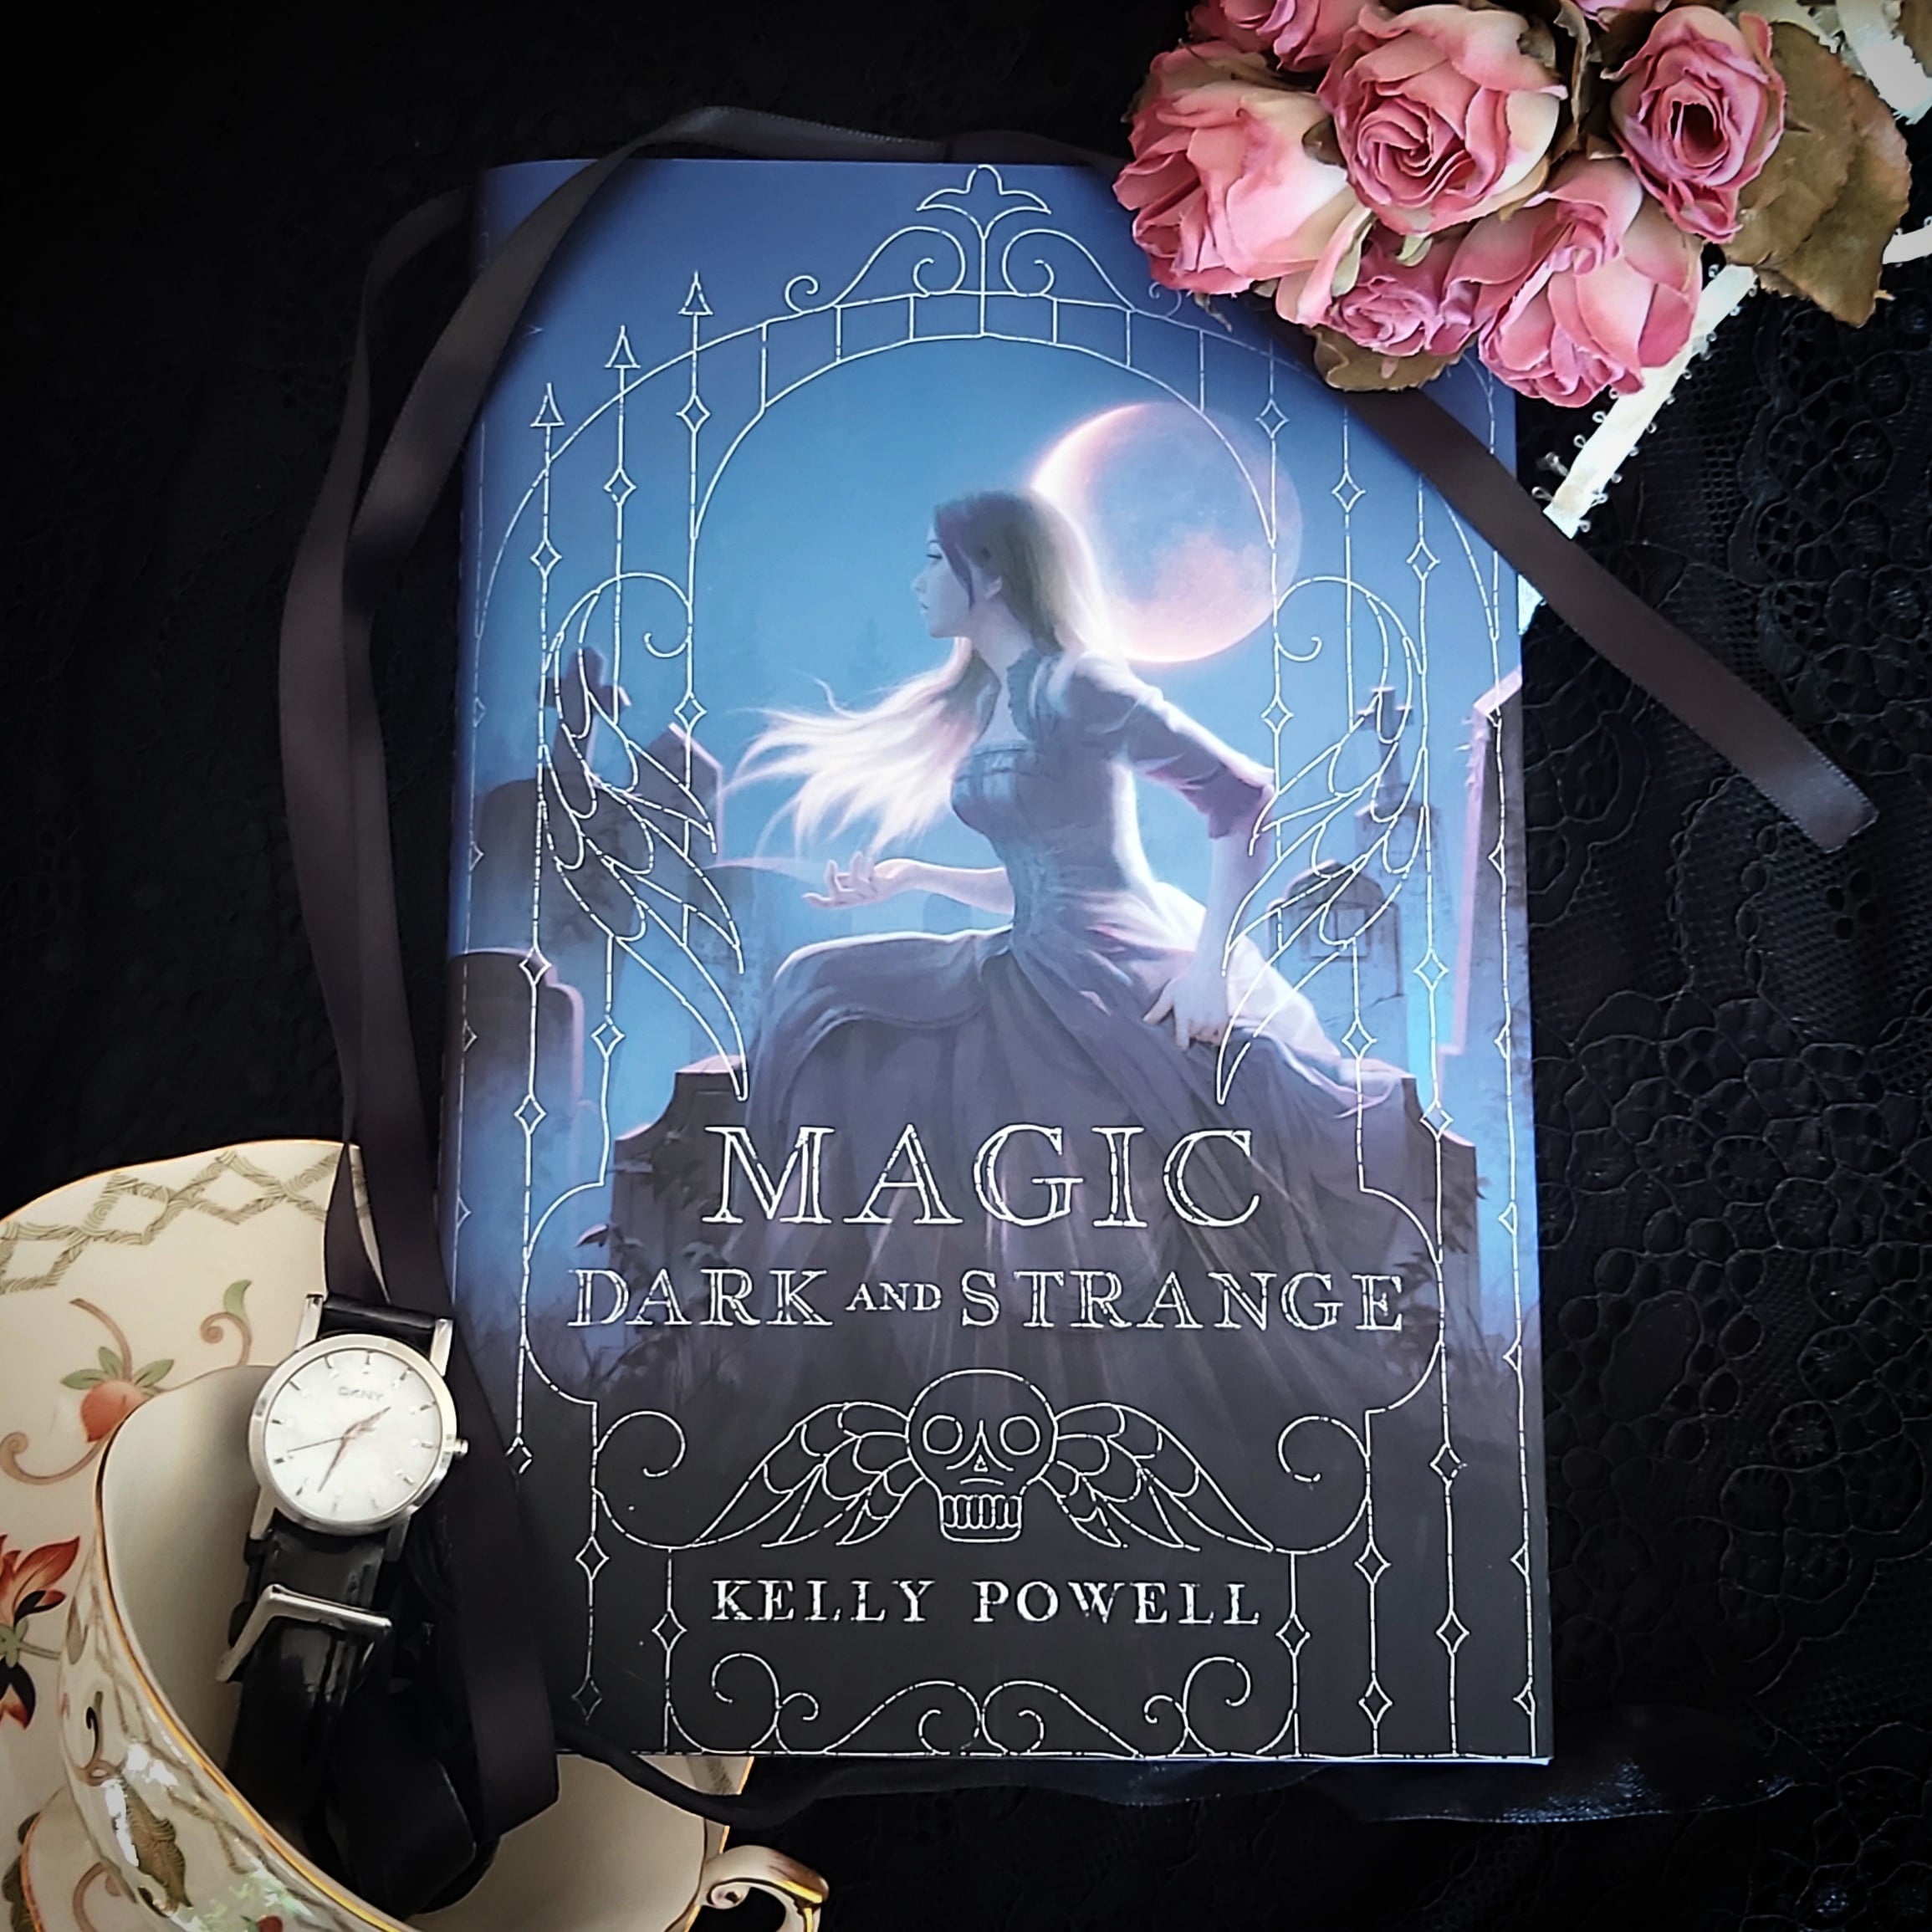 The book, Magic Dark and Strange by Kelly Powell, in a flatlay